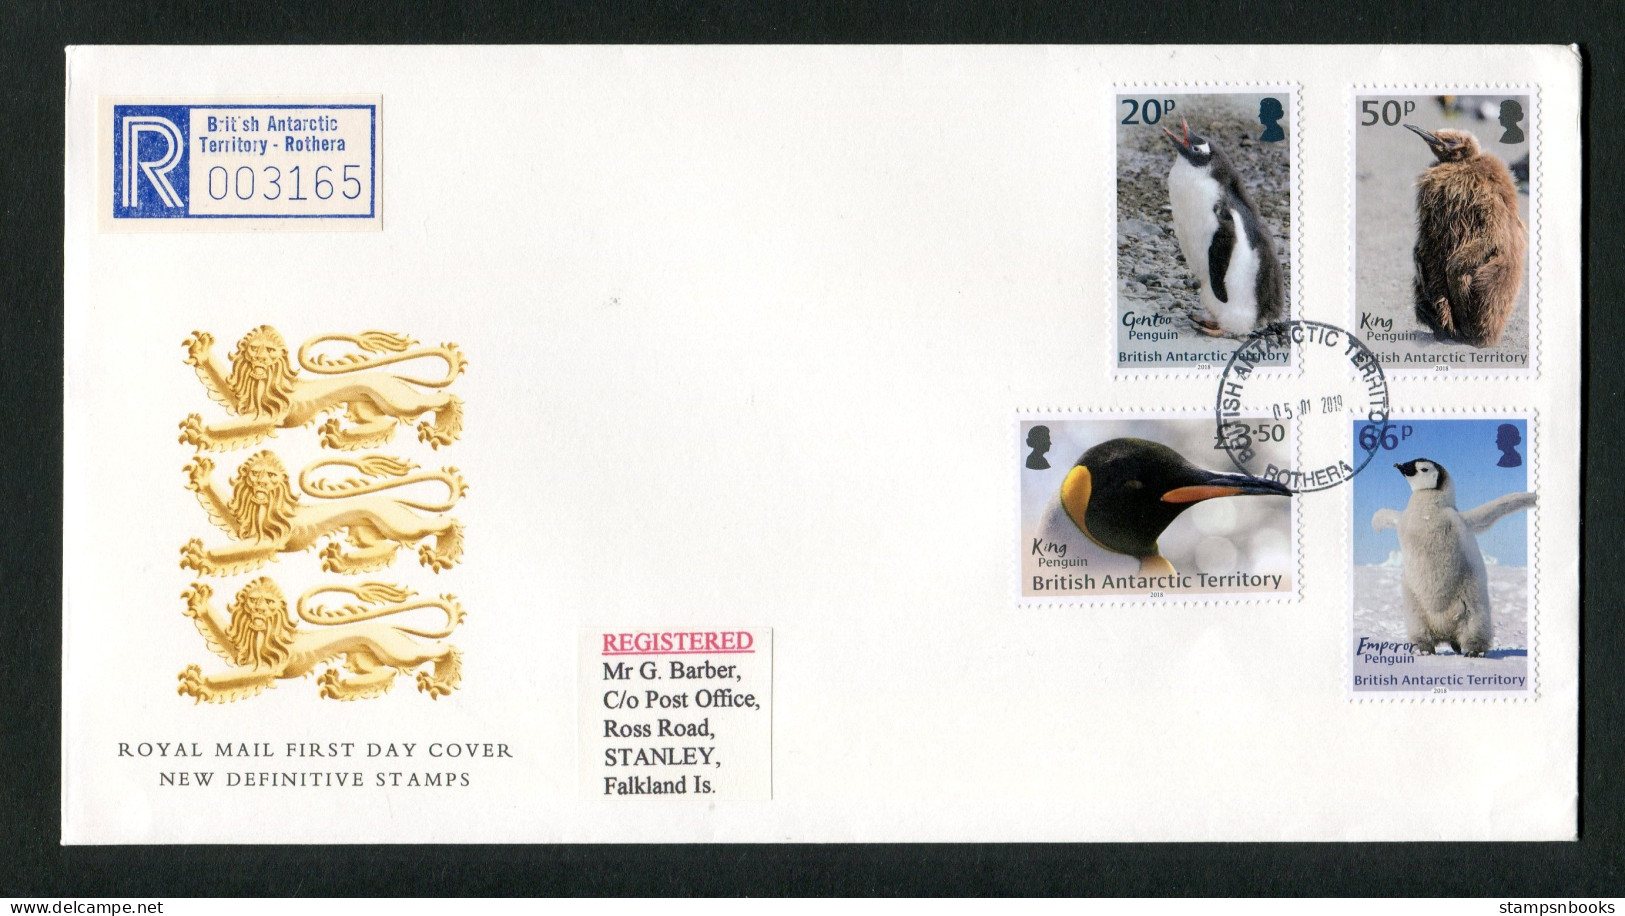 2019 B.A.T. Registered Rothera Penguins First Day Cover. British Antarctic Territory FDC - FDC